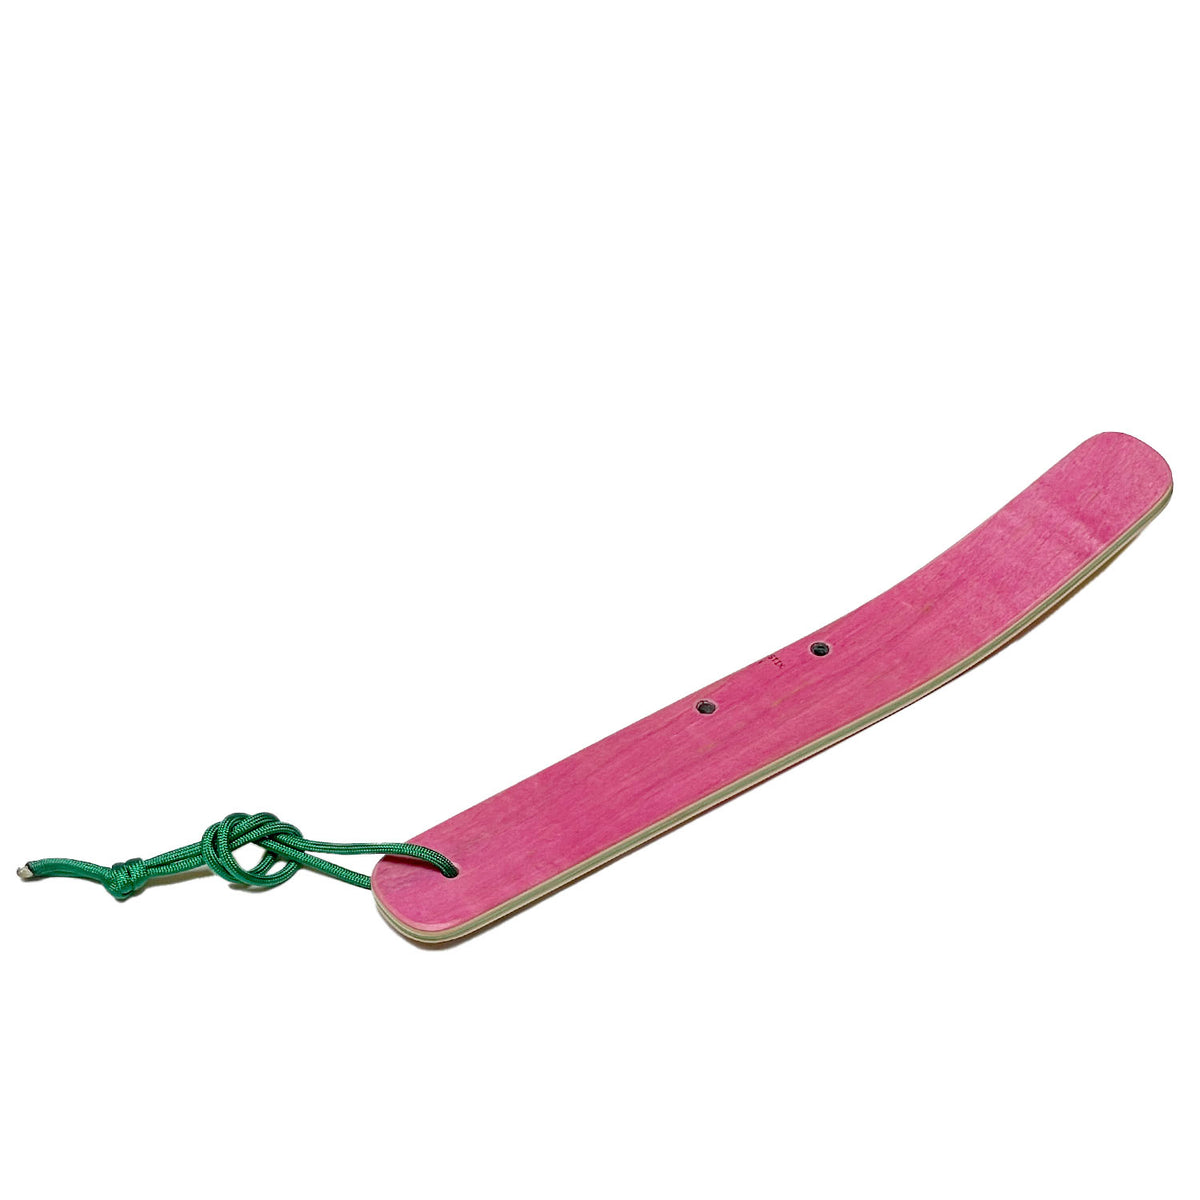 Shoe horn made of recycled skateboards in pink.